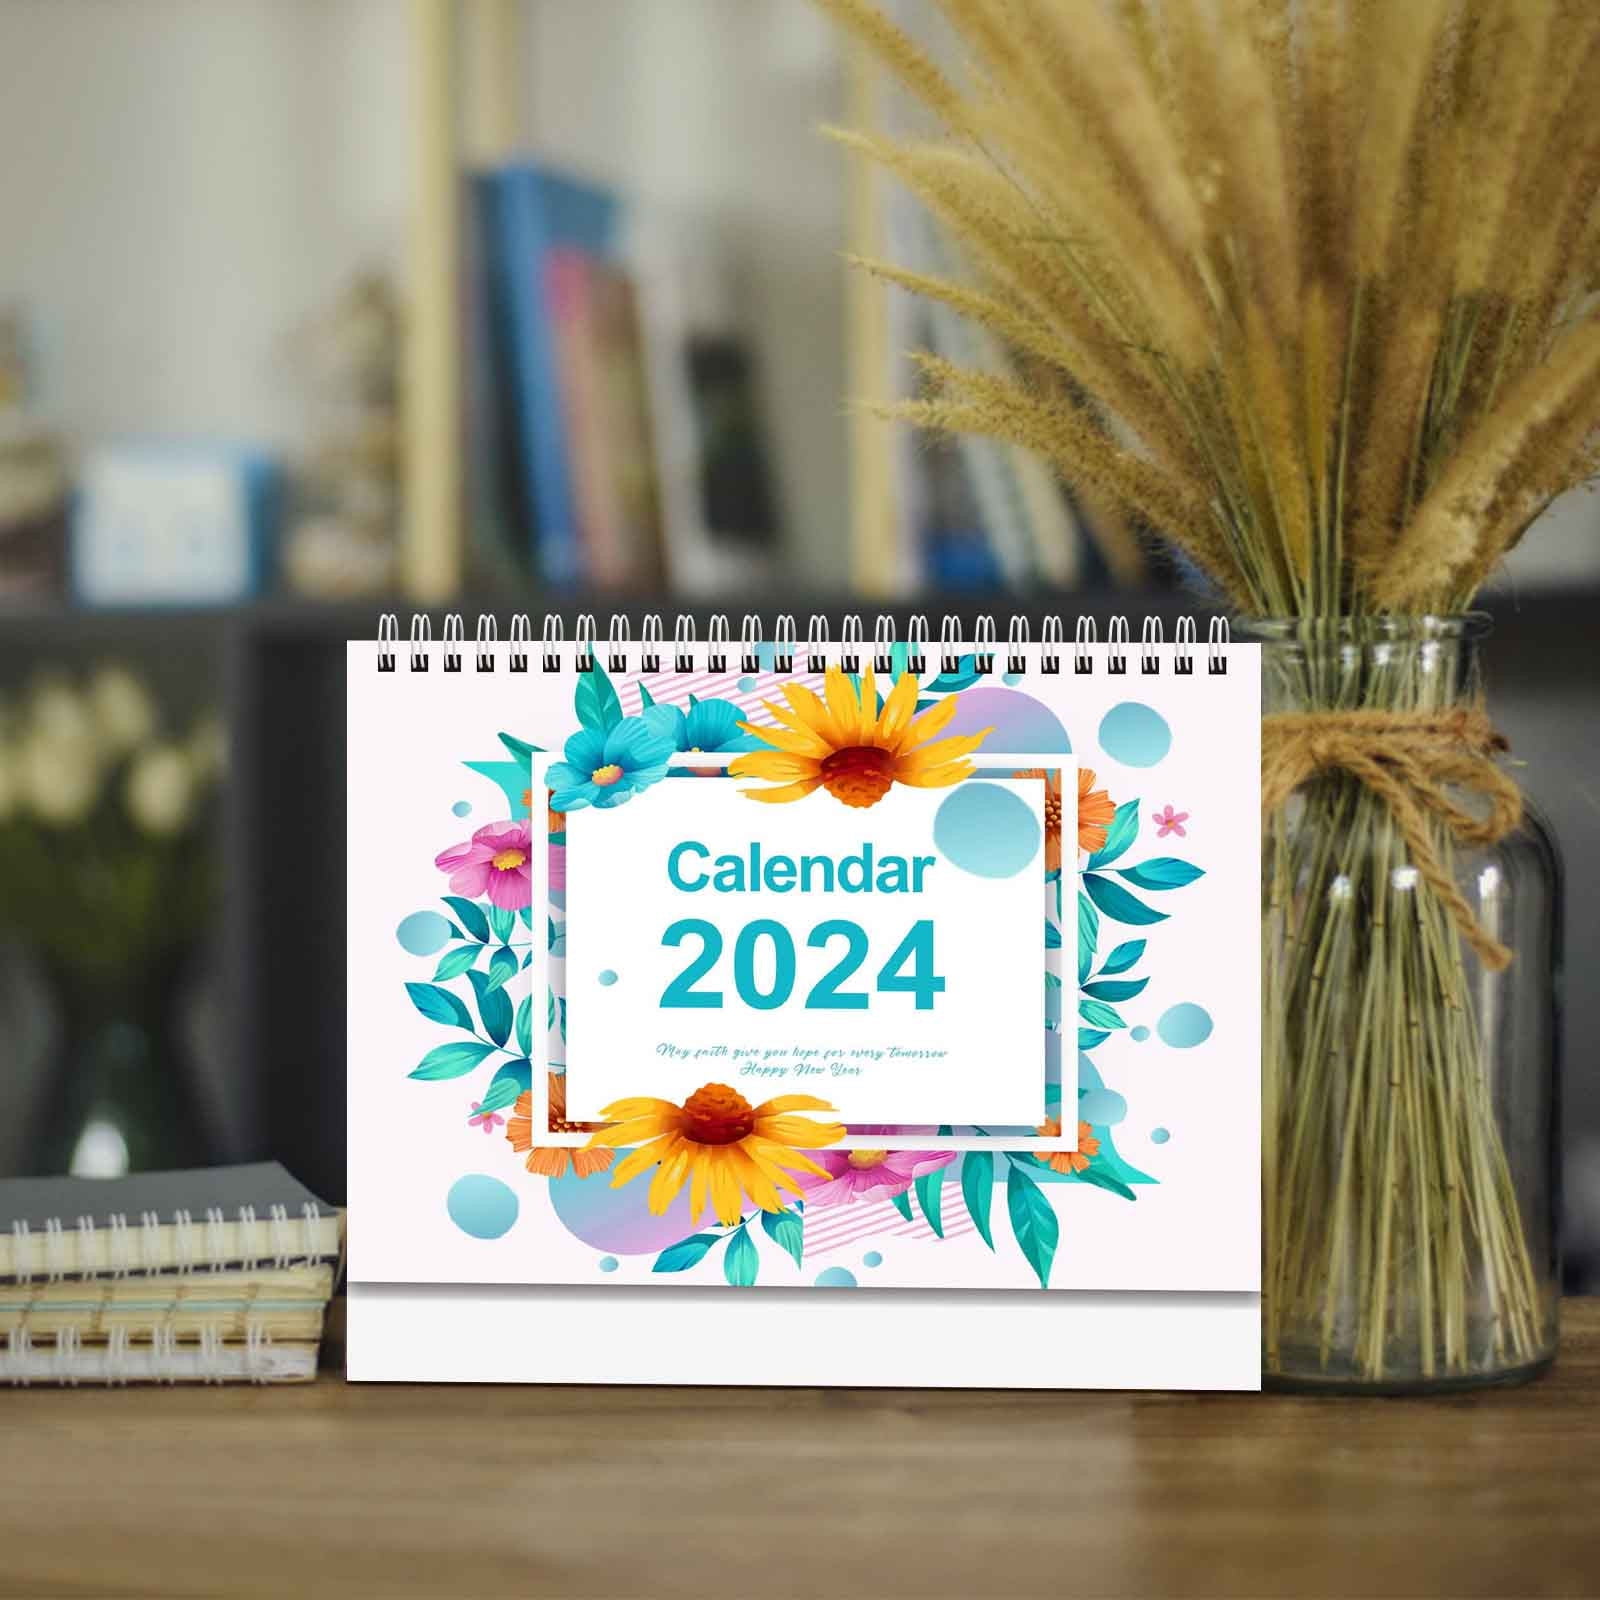 Birthday Zone Pick Me Up 2023-2024 Annual Catalog Cutting Dies Clear Stamp  Scrapbooking Frame Card Craft - AliExpress